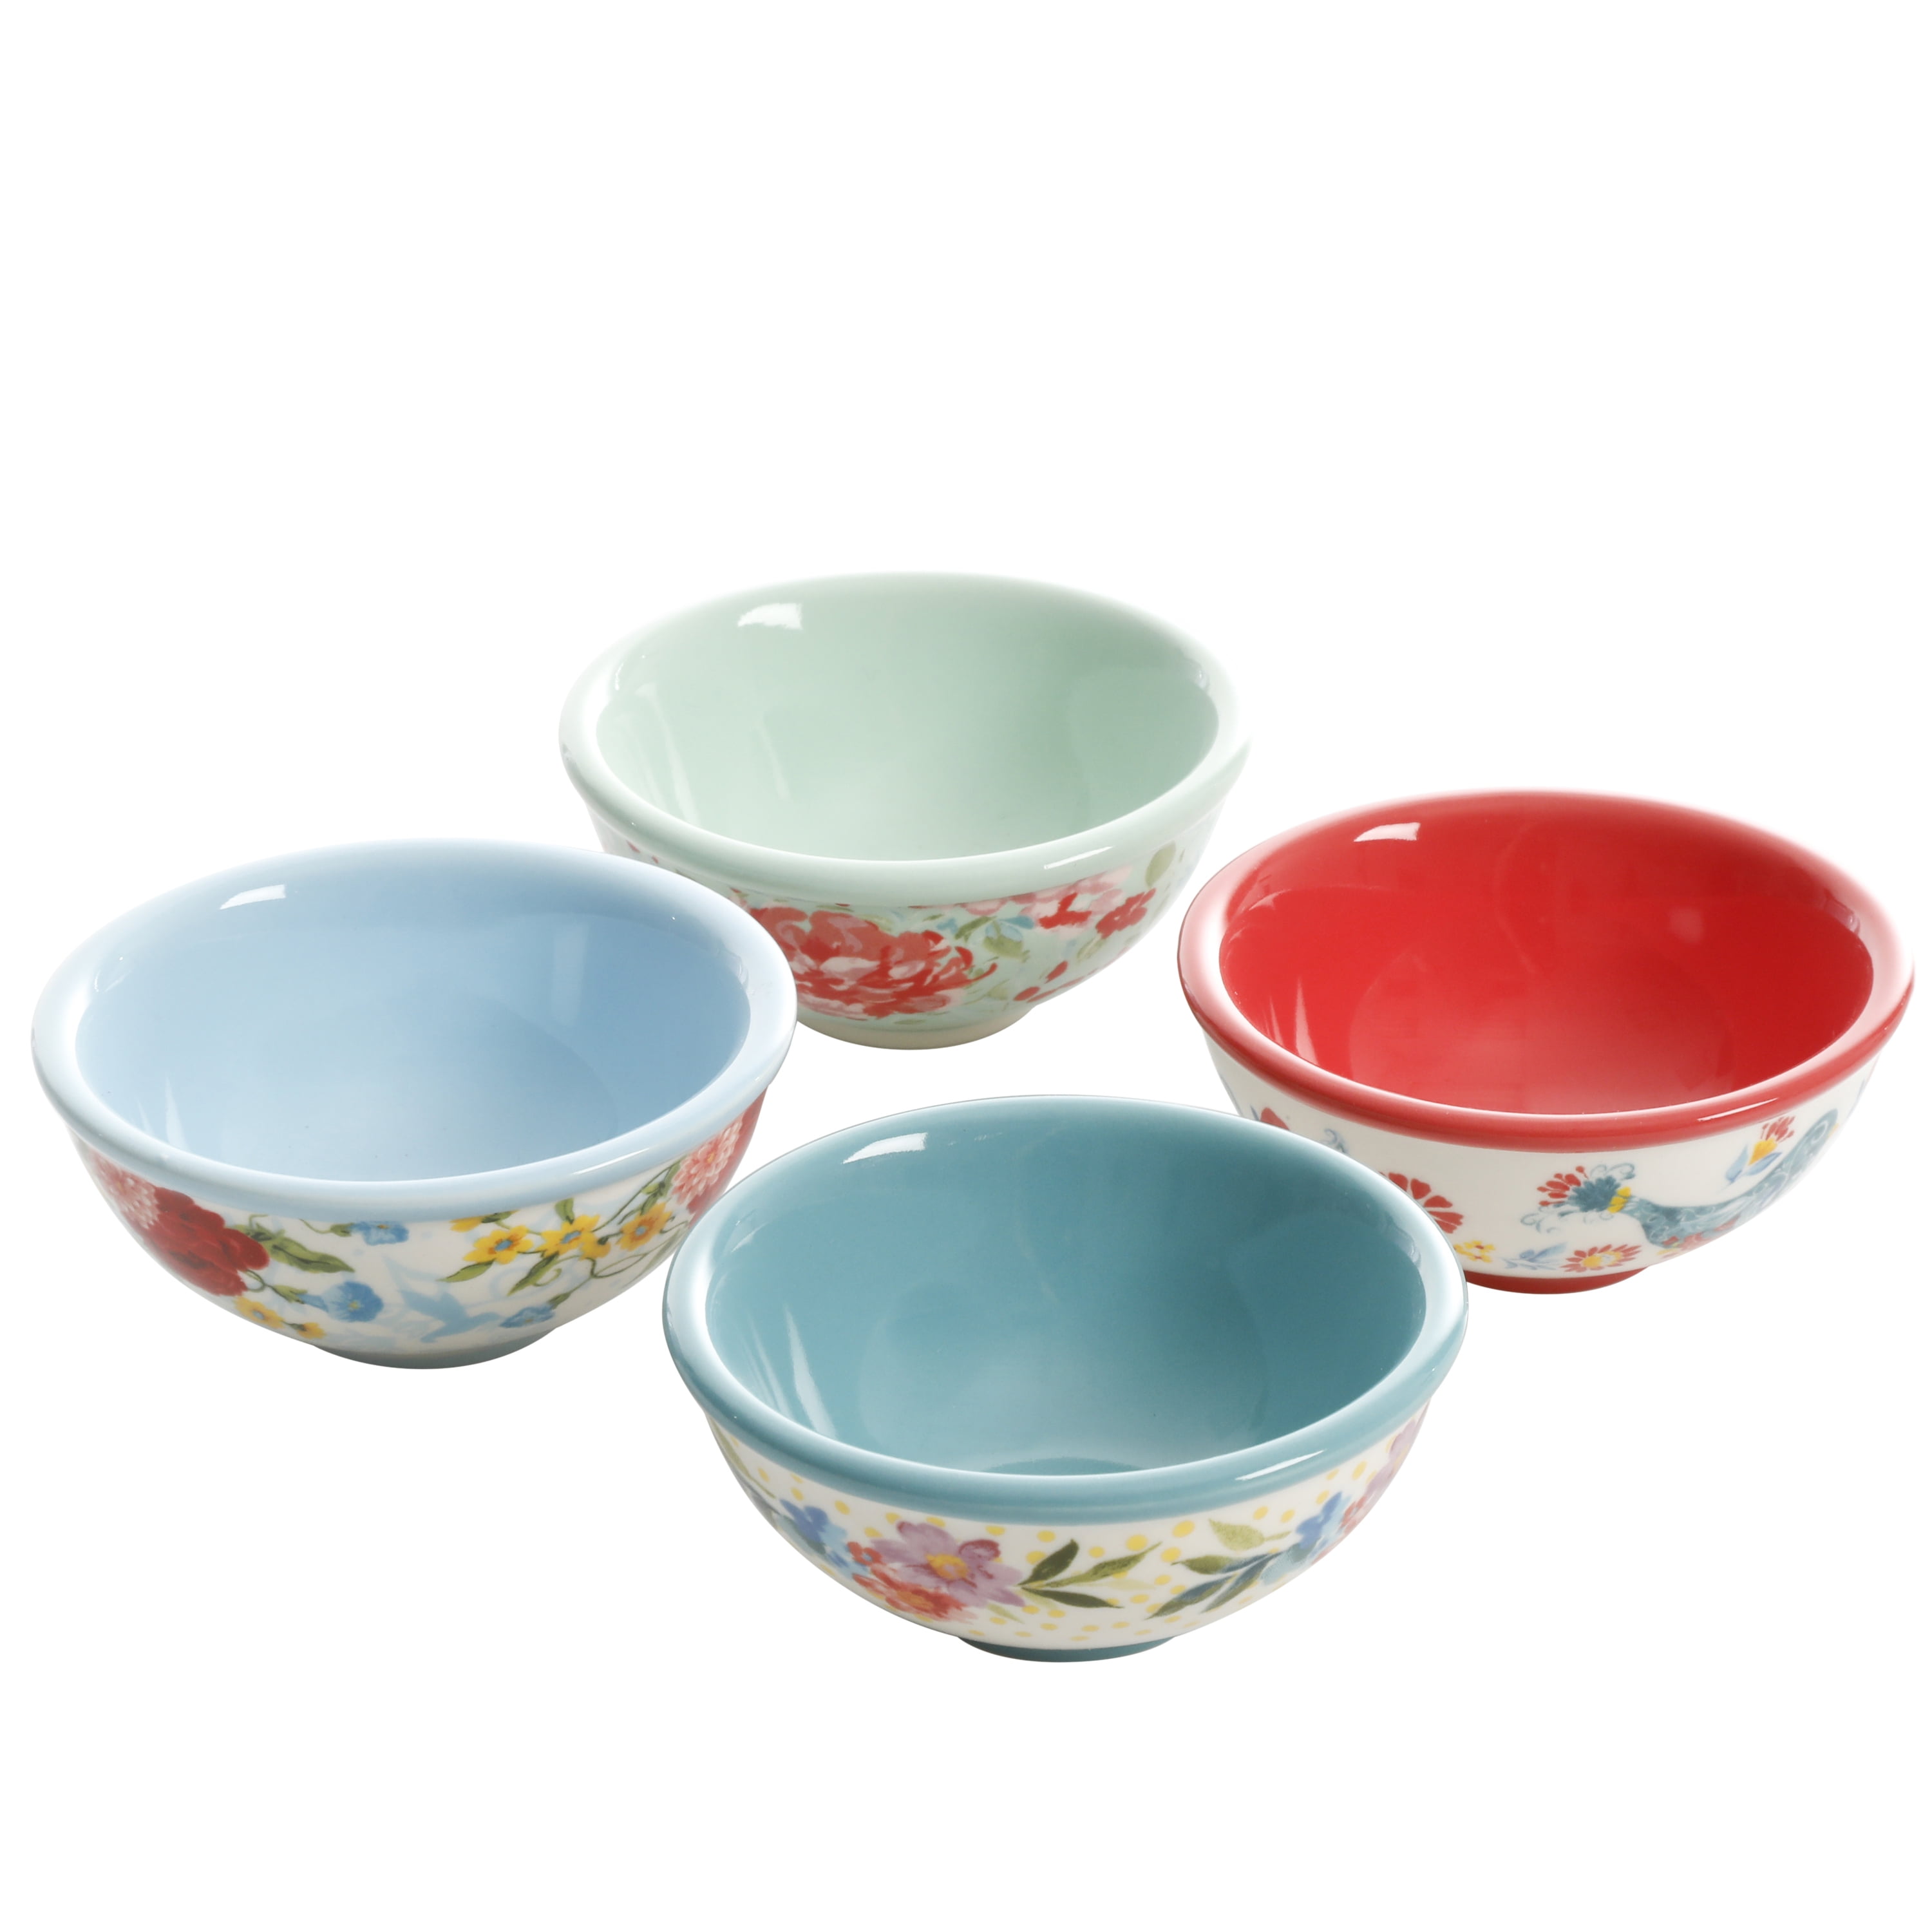 The Pioneer Women The Pioneer Woman Dipping Bowls 4 Pack 3.1 inch (Teal)